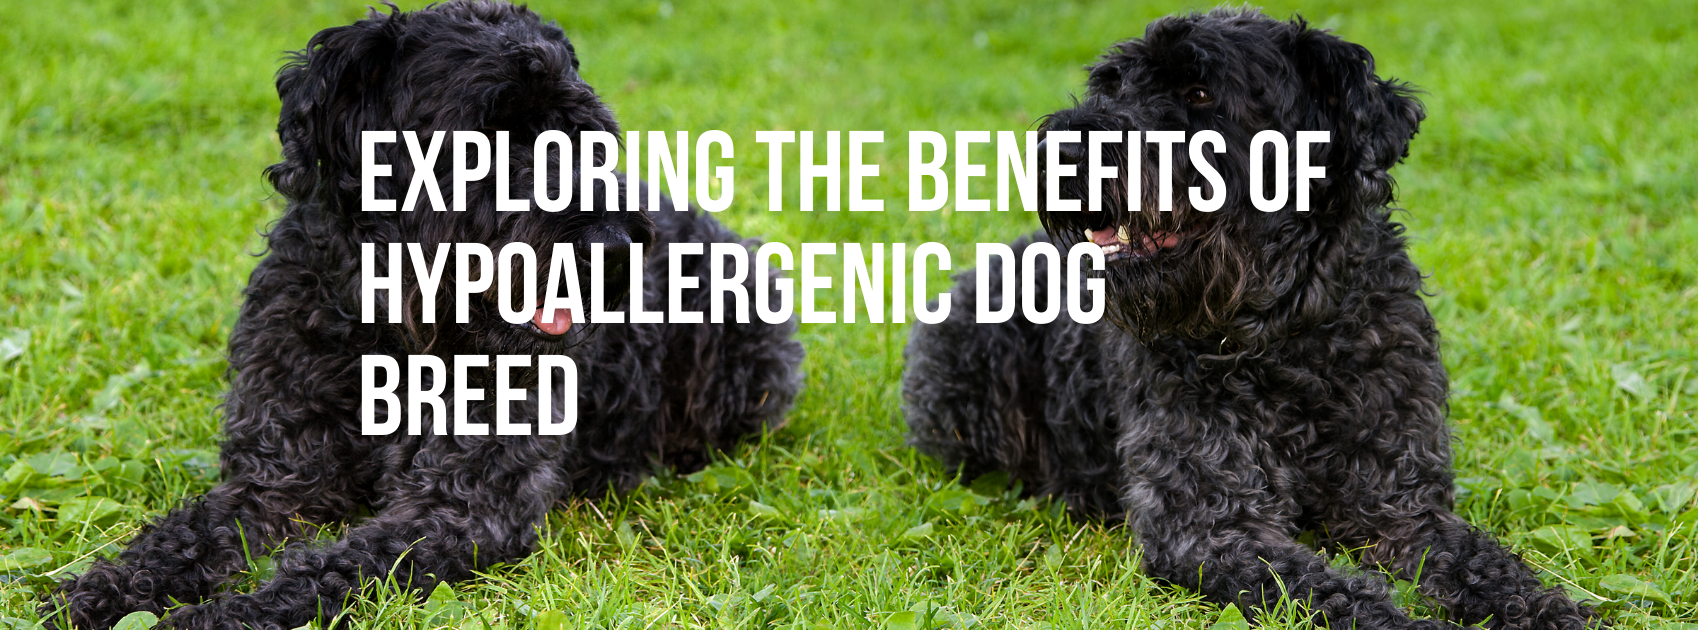 Exploring the Benefits of Hypoallergenic Dog Breed